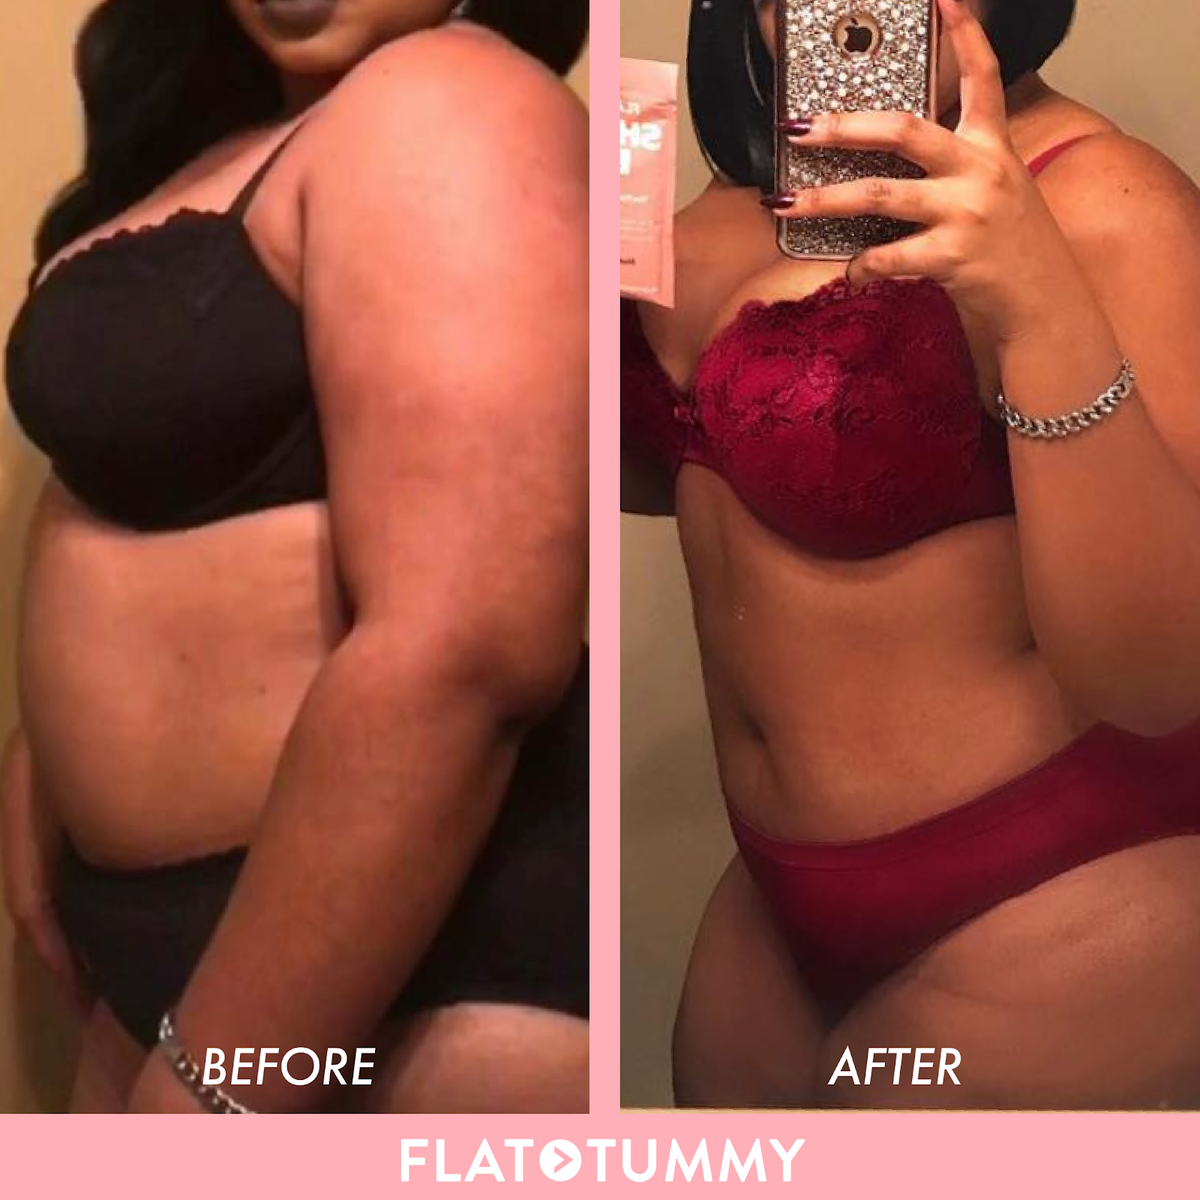 Chocolate Meal replacement before and after